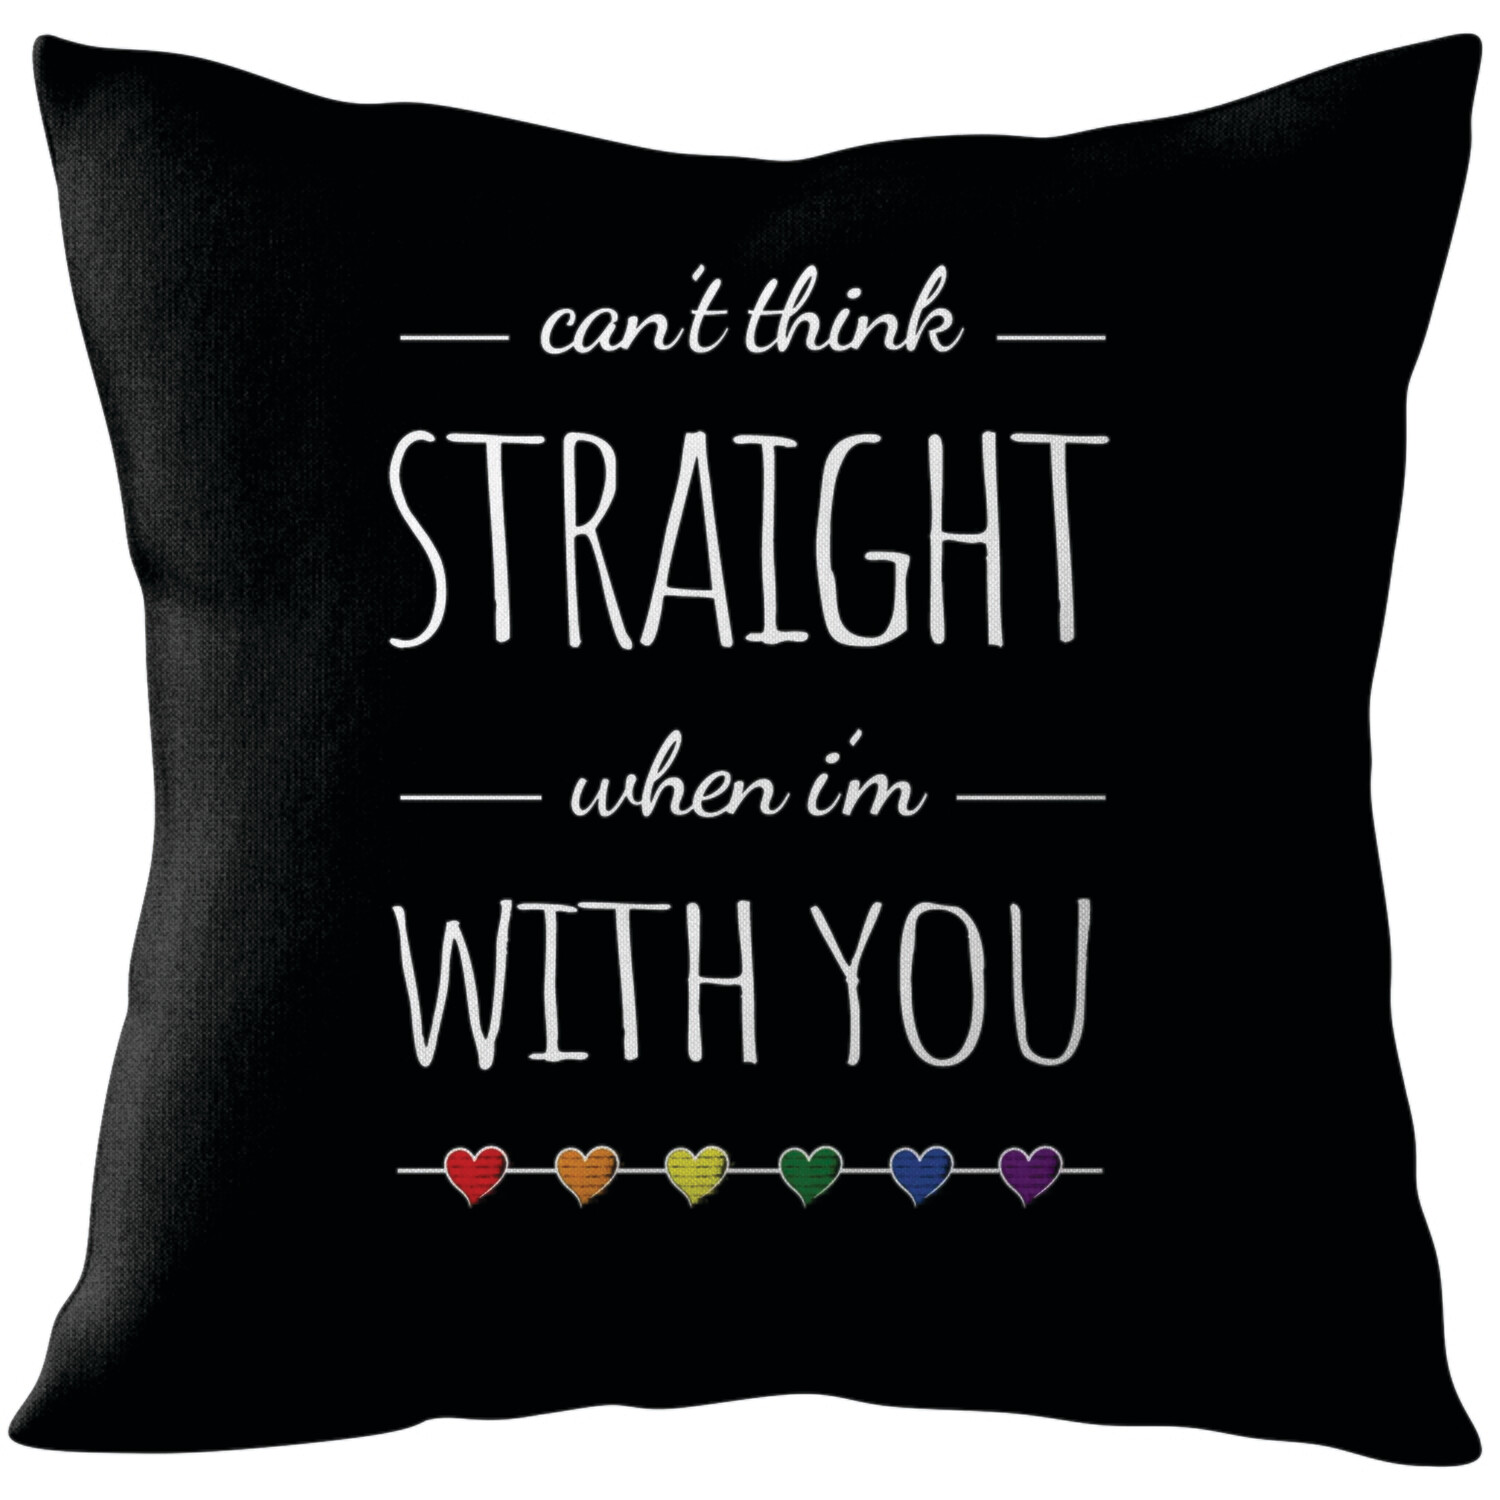 Cant Think Straight When I'm With You - Lesbian Gay Couple Cushion